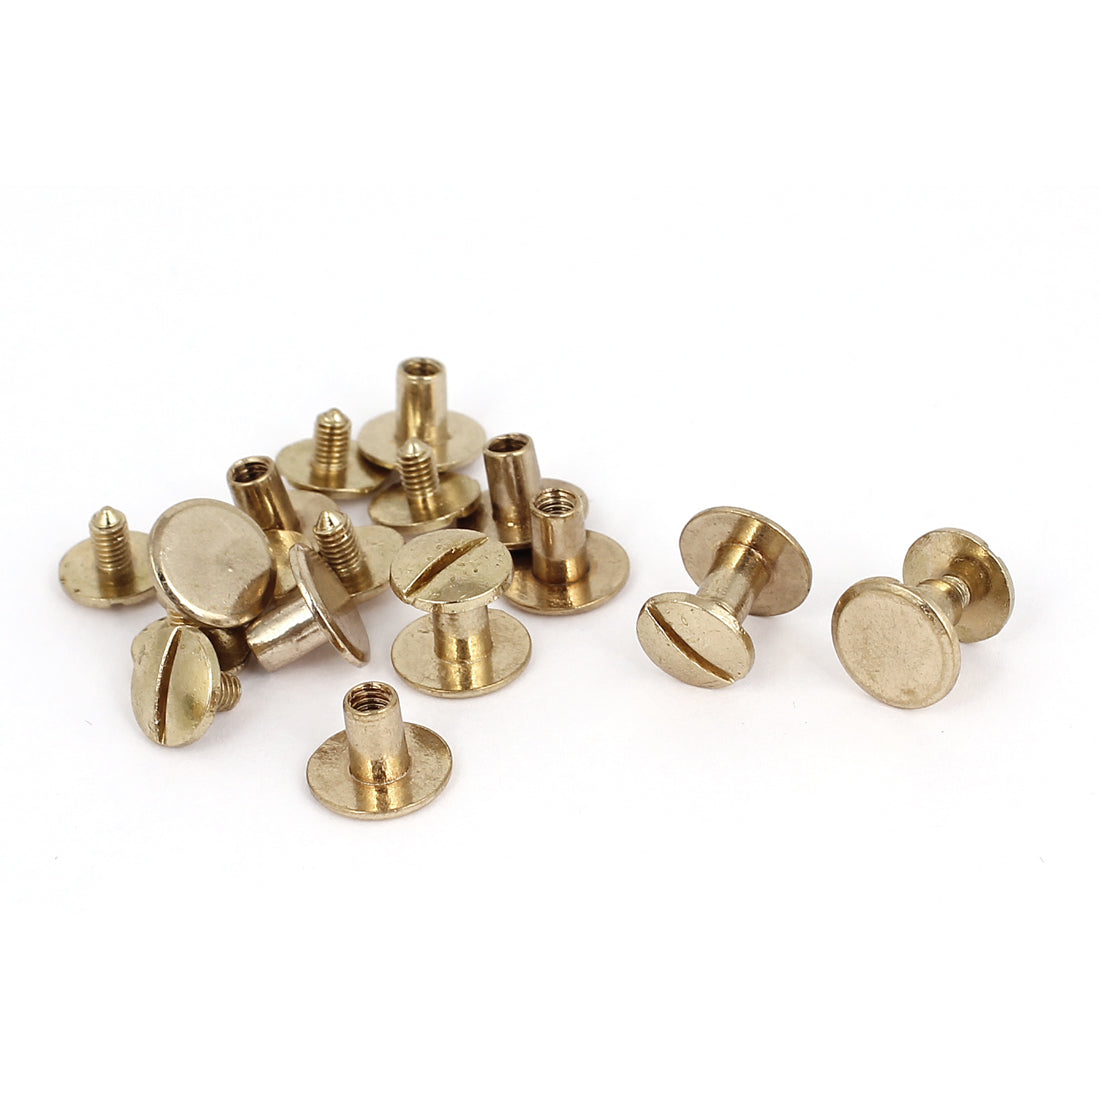 uxcell Uxcell 4.5x7mm Brass Plated Binding Chicago Screw Post For Albums Scrapbook 9mm+10.5mm Head Dia 10pcs